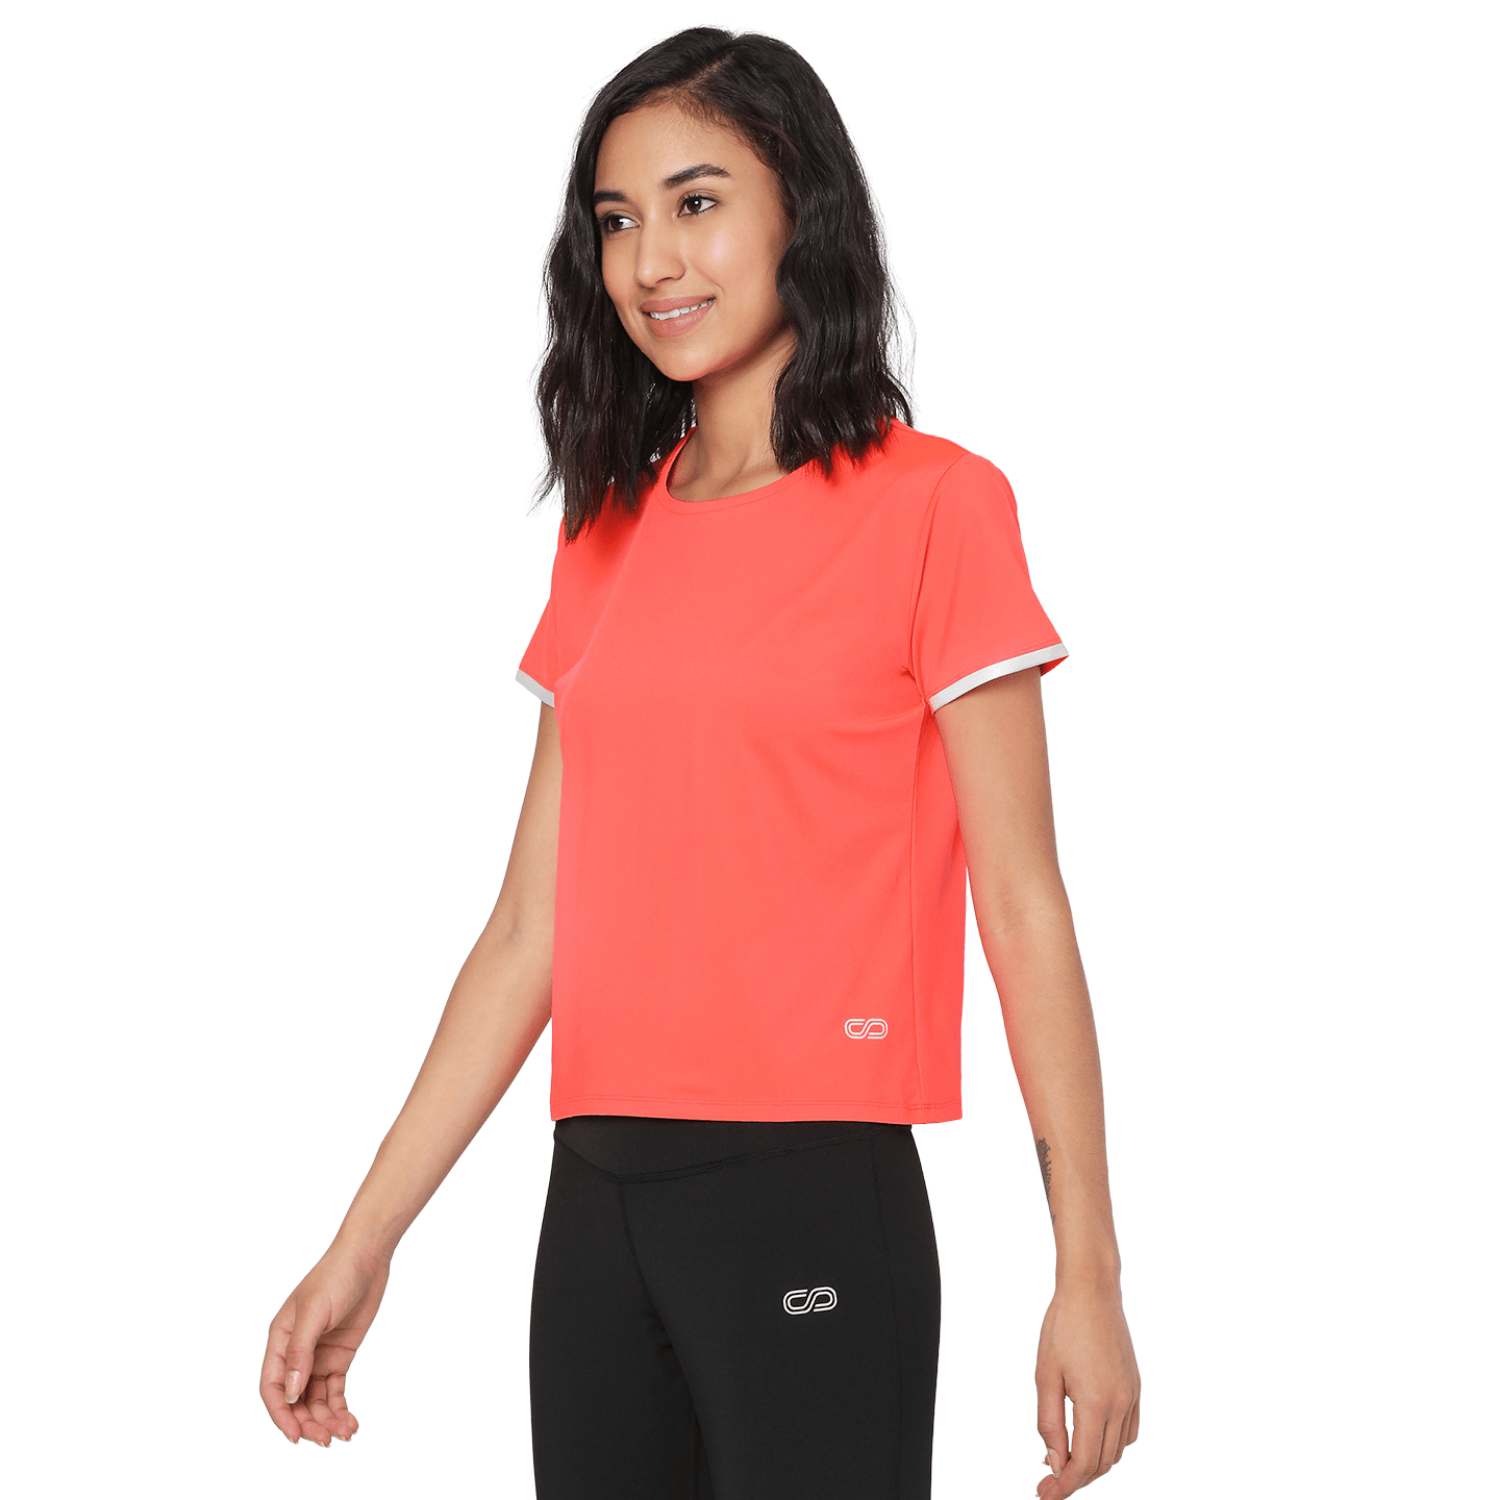 Mesh V Back Top Fiery Coral-Short Sleeve Tee-Silvertraq-Fiery Coral-XS-Silvertraq